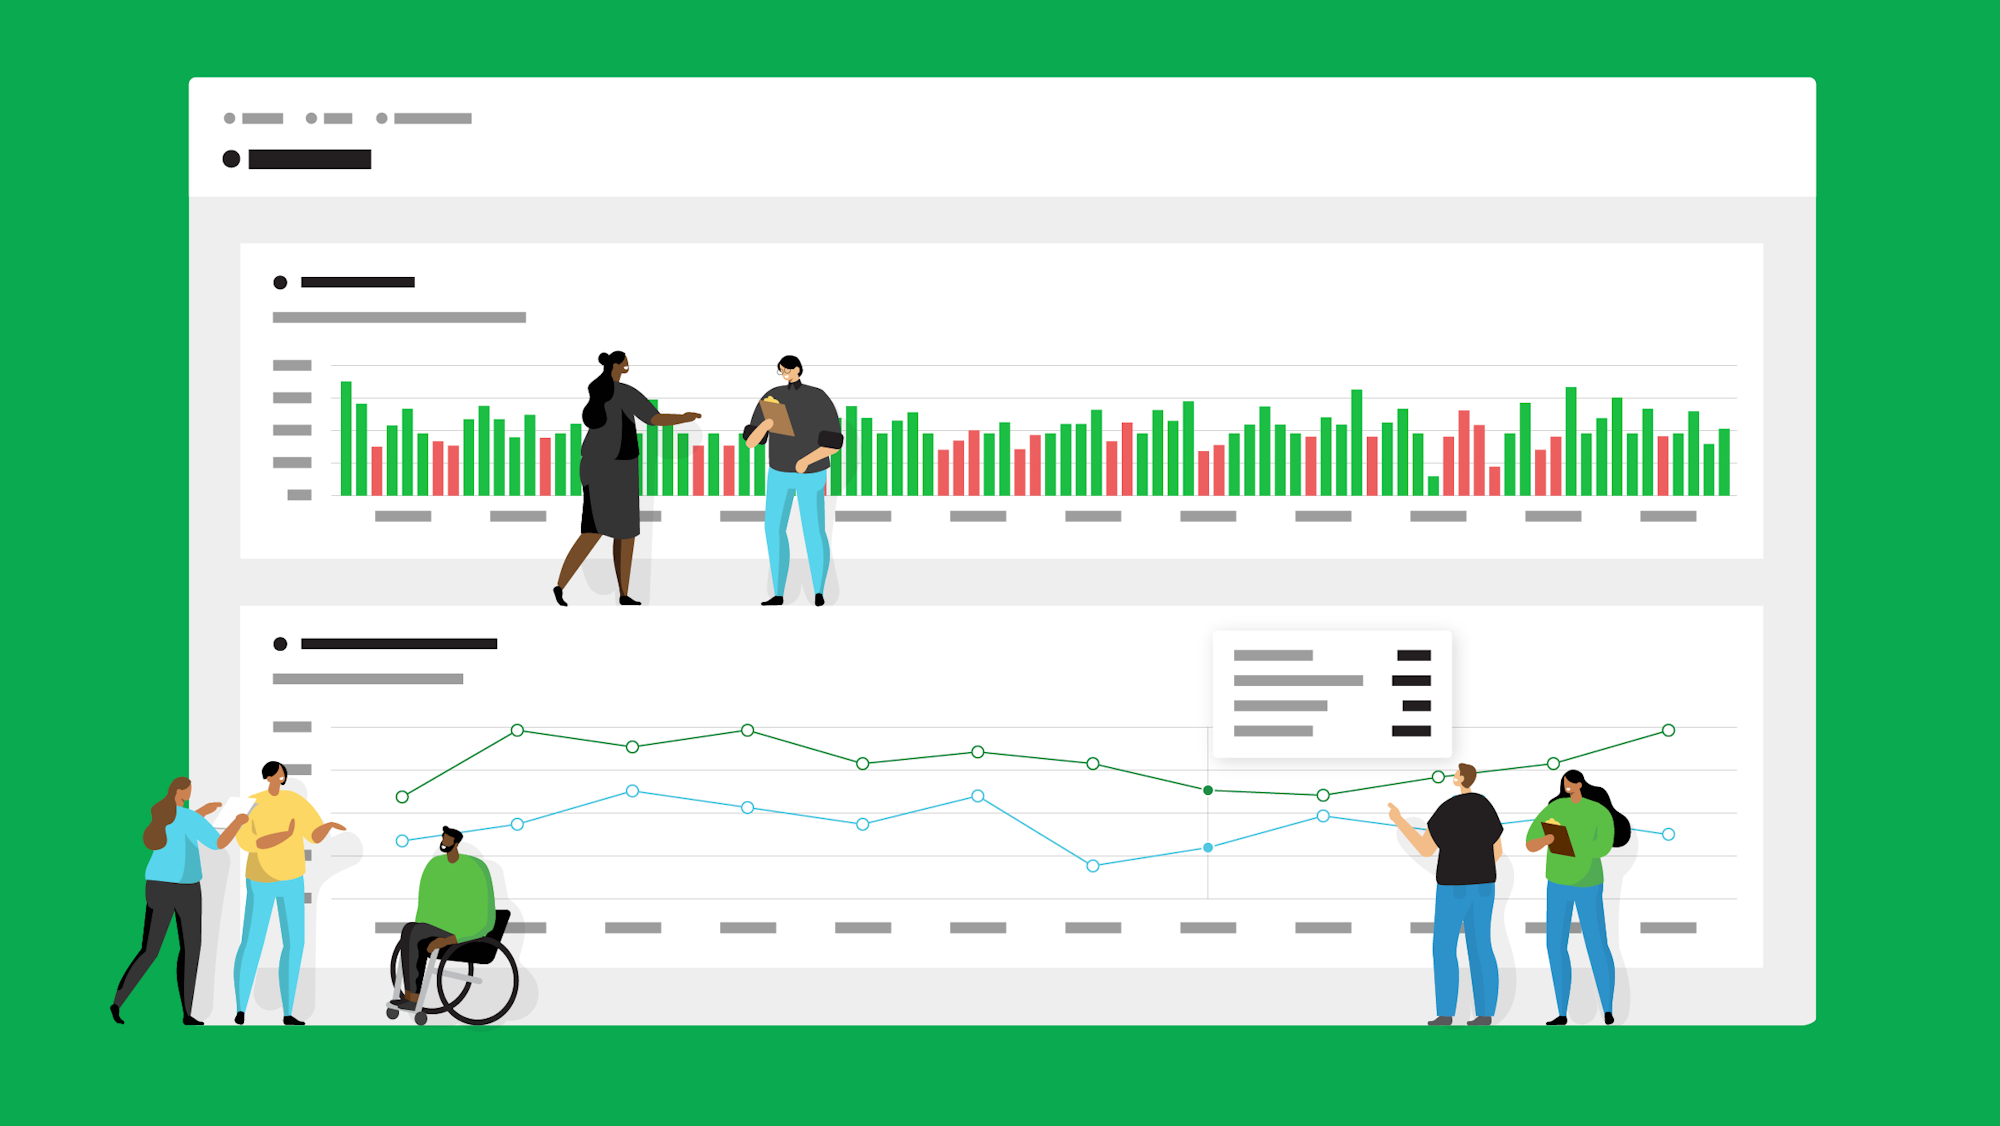 CircleCI releases the latest Insights dashboard for monitoring and optimizing CI/CD pipelines